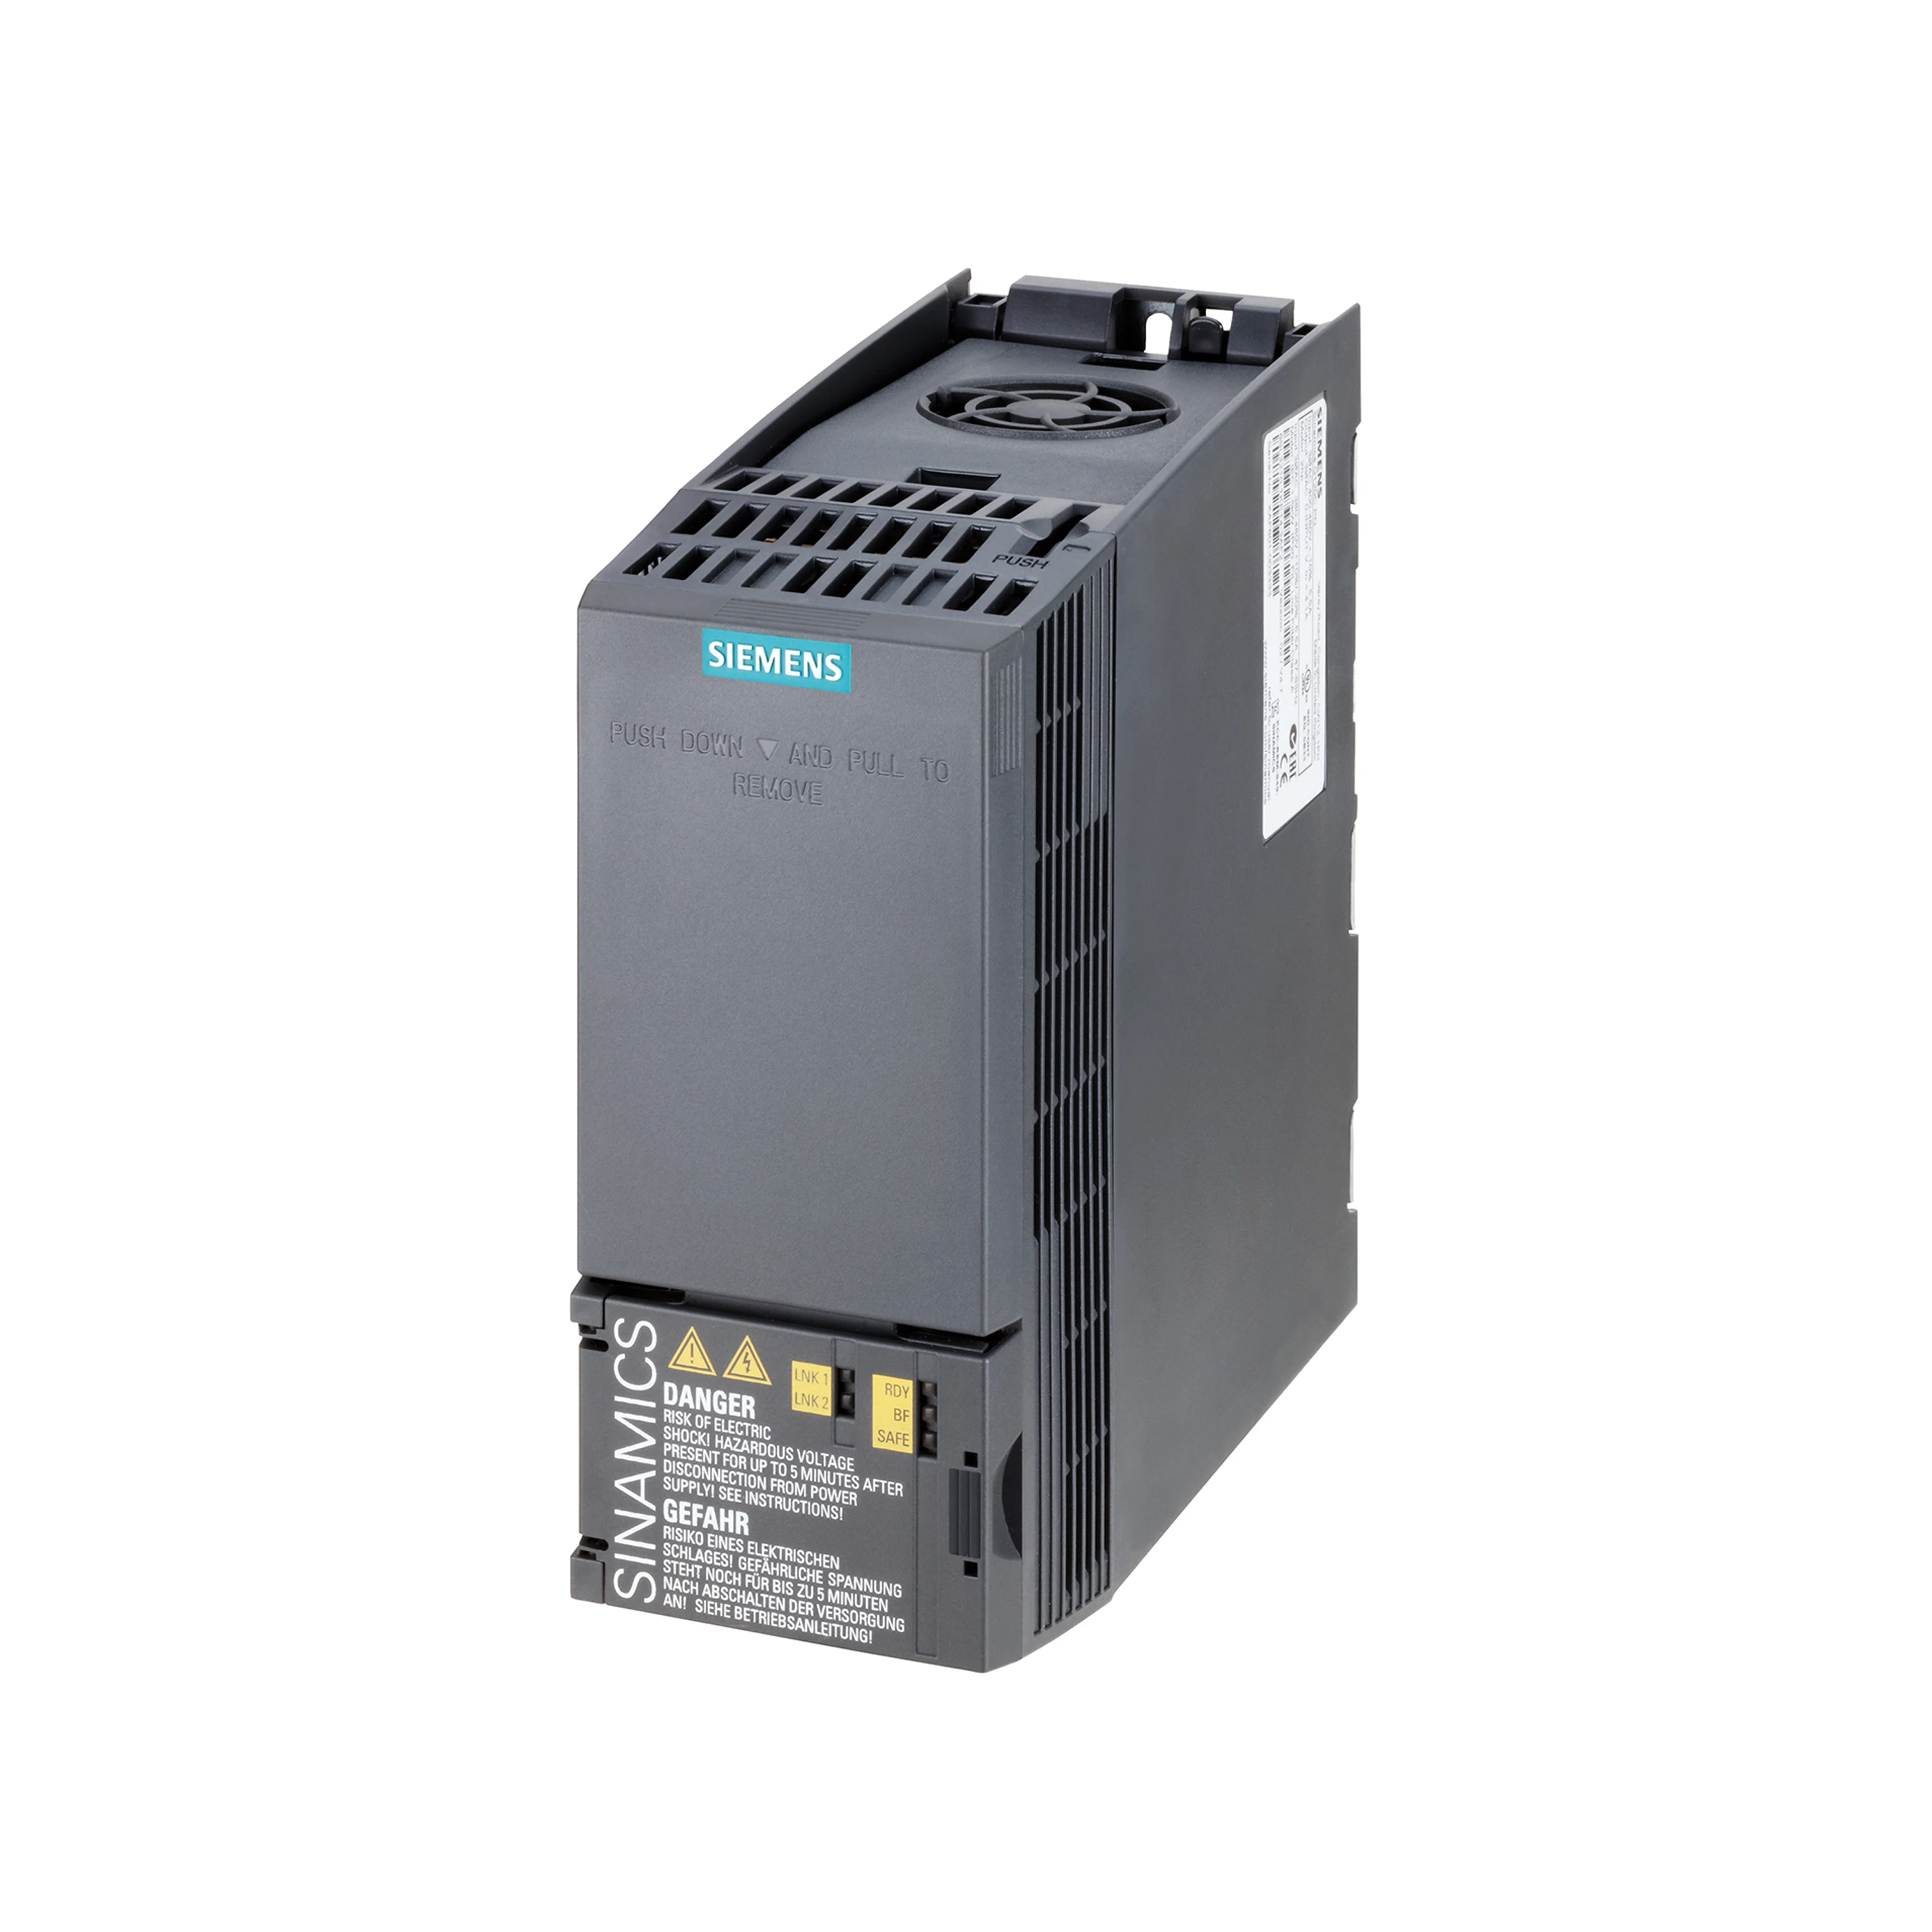 SINAMICS G120C Rated Power 0.55KW with 150% Overload 3AC380-480V 6SL3210-1KE11-8UF2 for Siemens